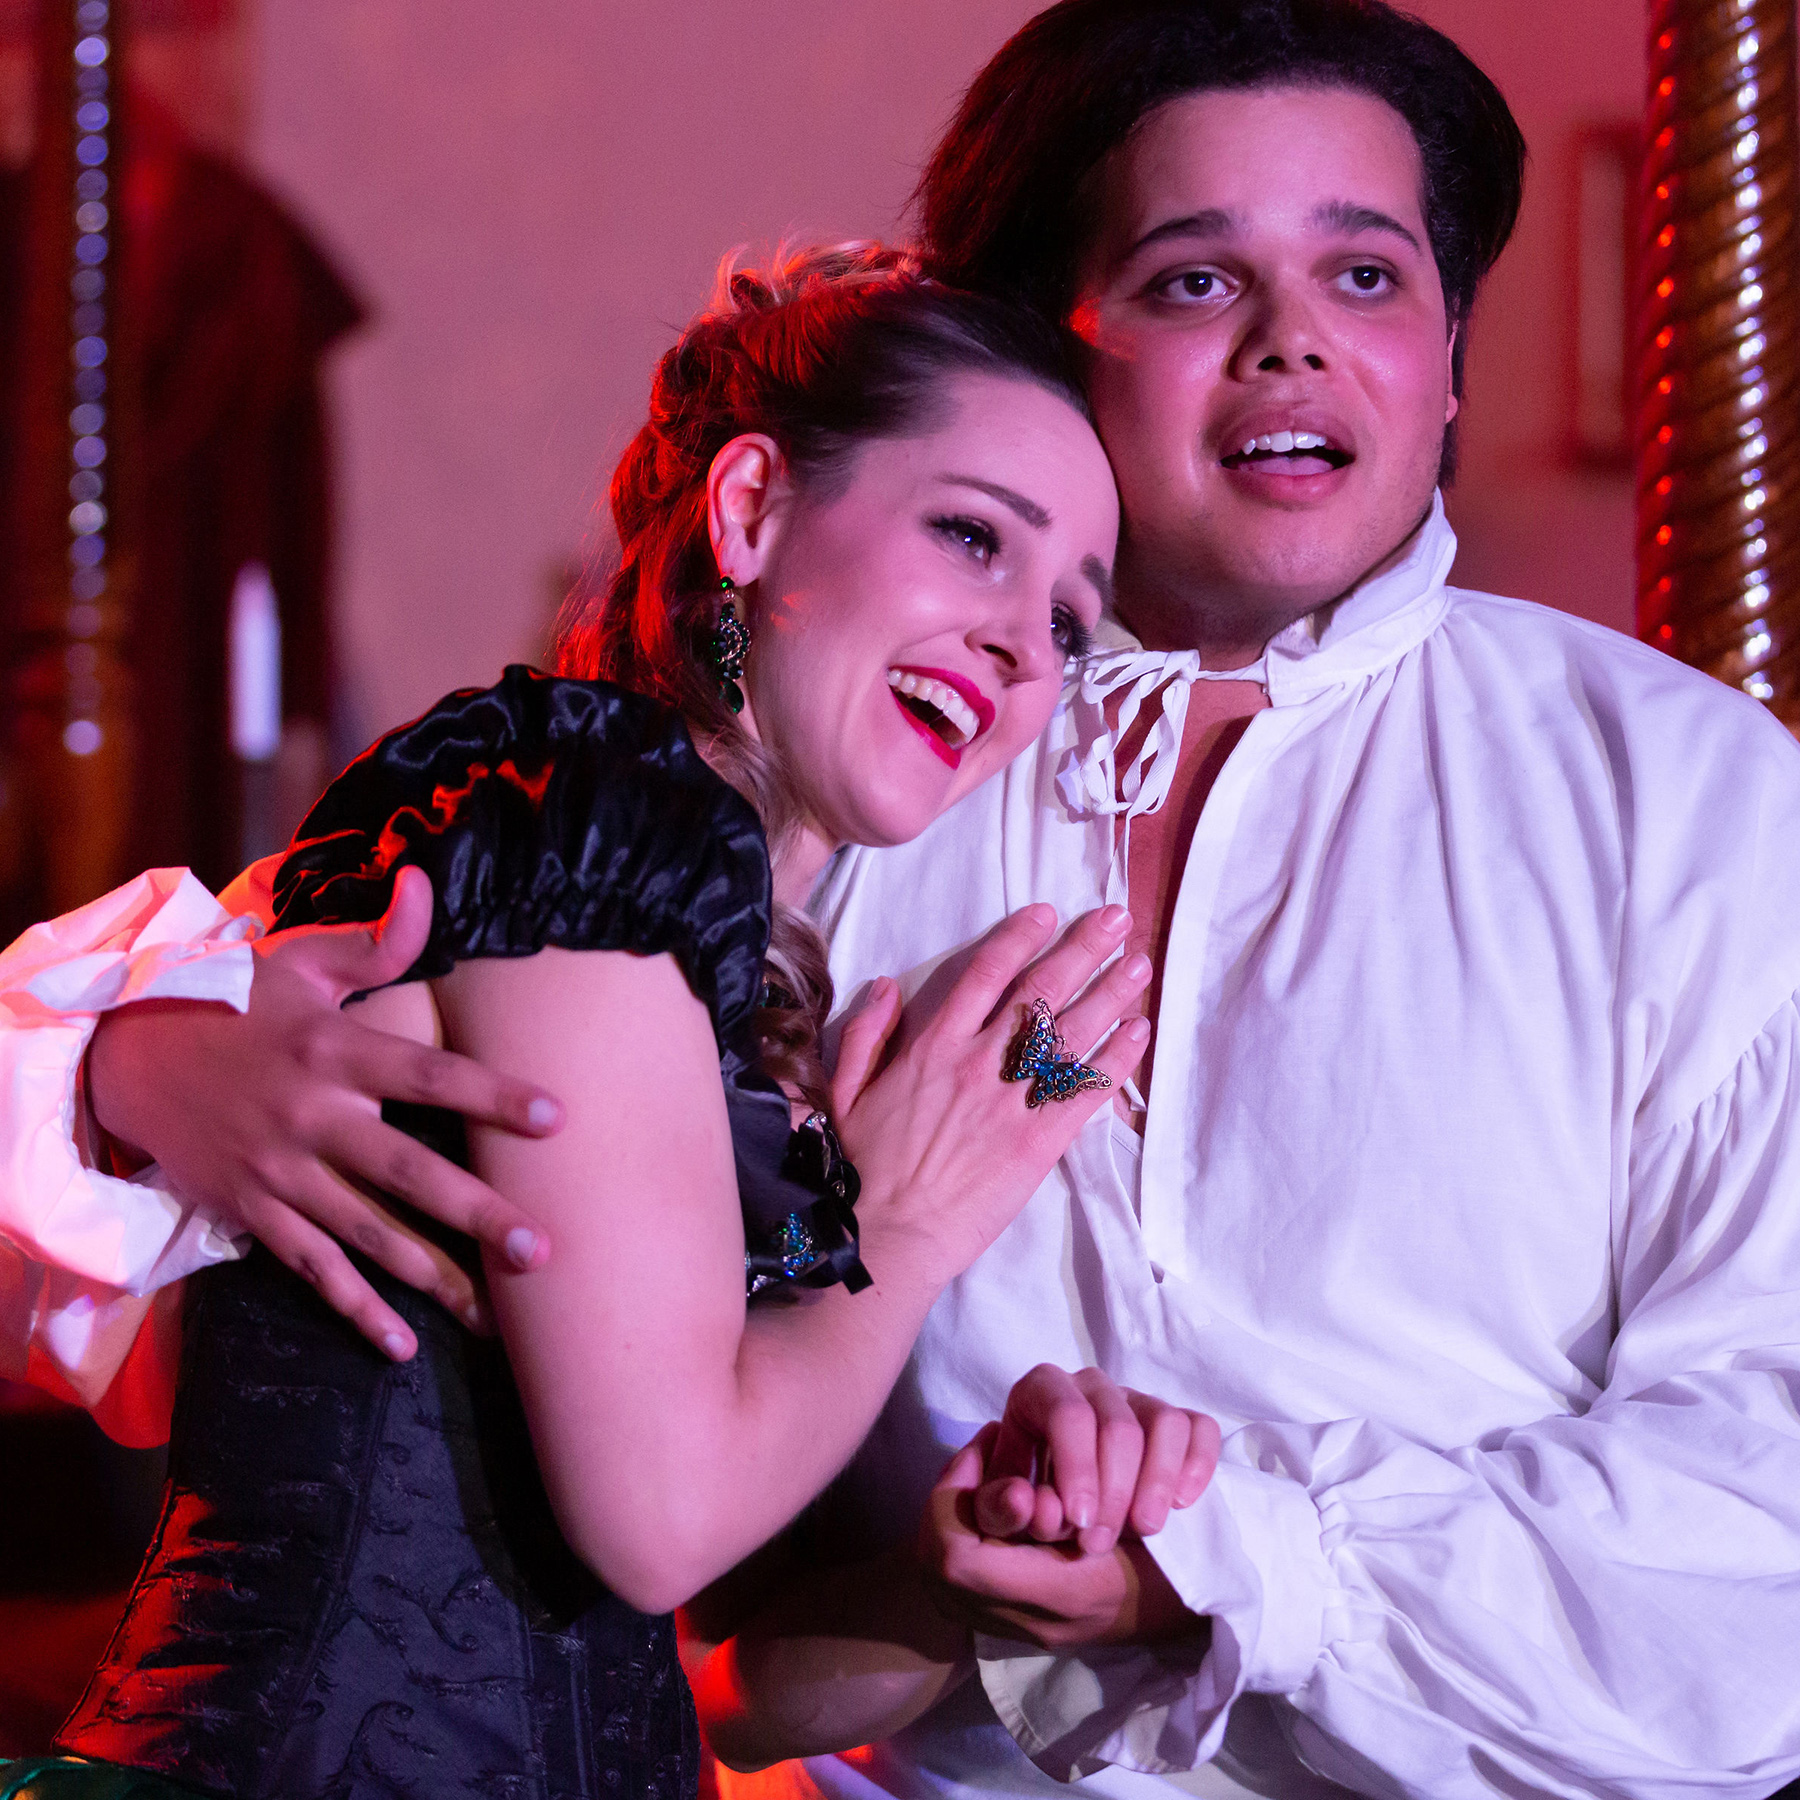 Bathed in rosy light, two performers have their arms around each other, gazing into the distance with dreamy smiles - on the left, a beautiful blonde woman wearing a ruffled black Victorian top and crystal jewelry, and on the right, a young Black man wearing a white poet shirt.